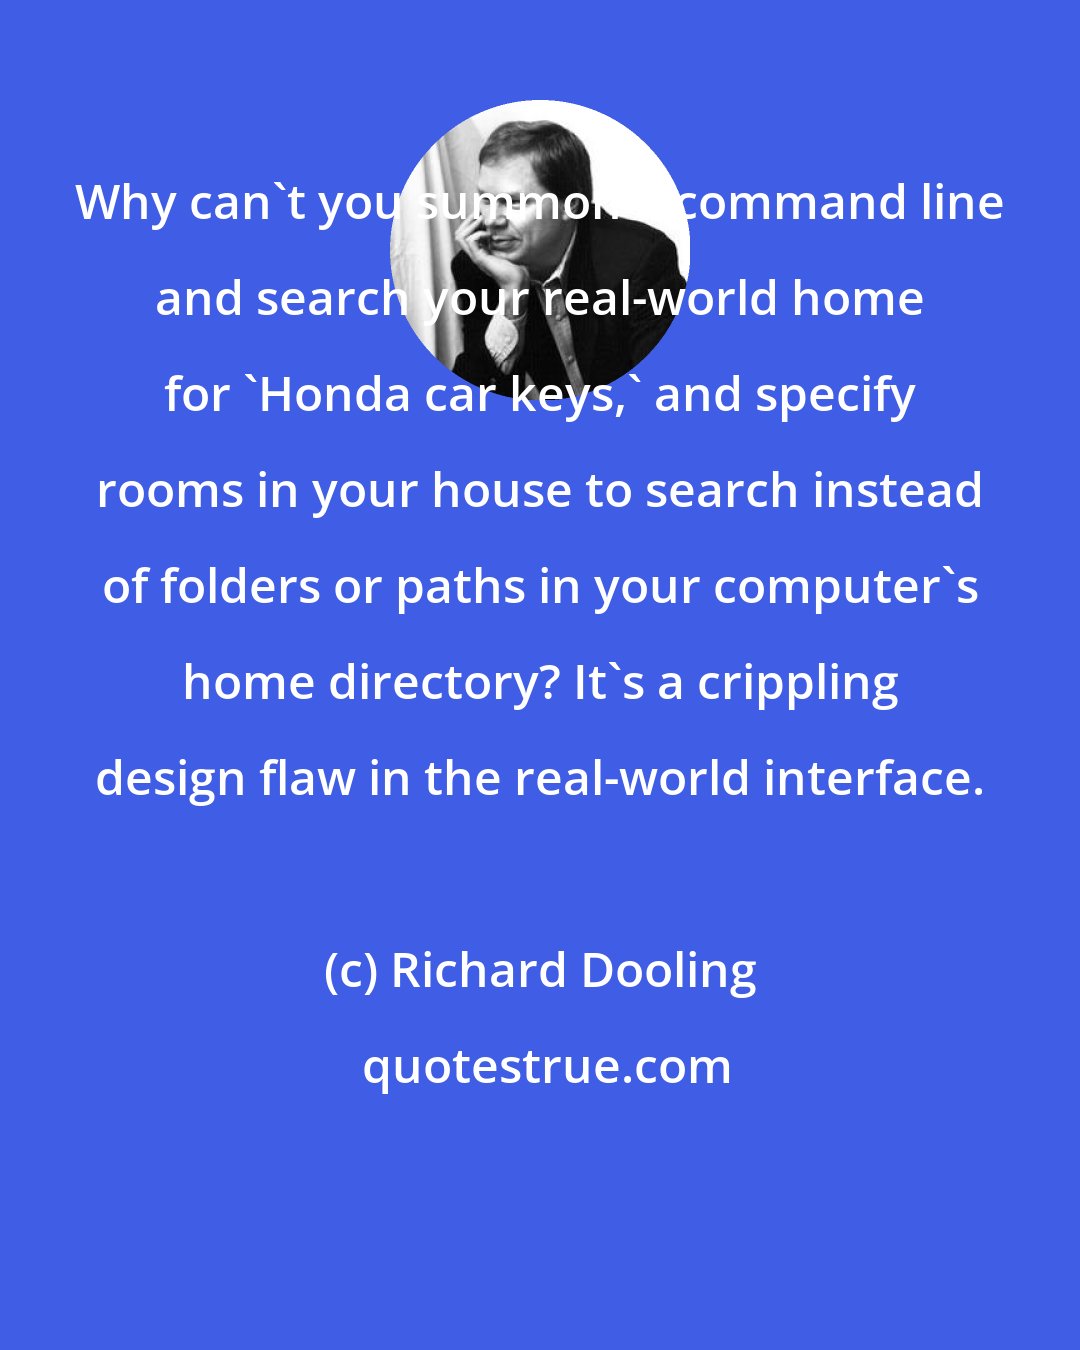 Richard Dooling: Why can't you summon a command line and search your real-world home for 'Honda car keys,' and specify rooms in your house to search instead of folders or paths in your computer's home directory? It's a crippling design flaw in the real-world interface.